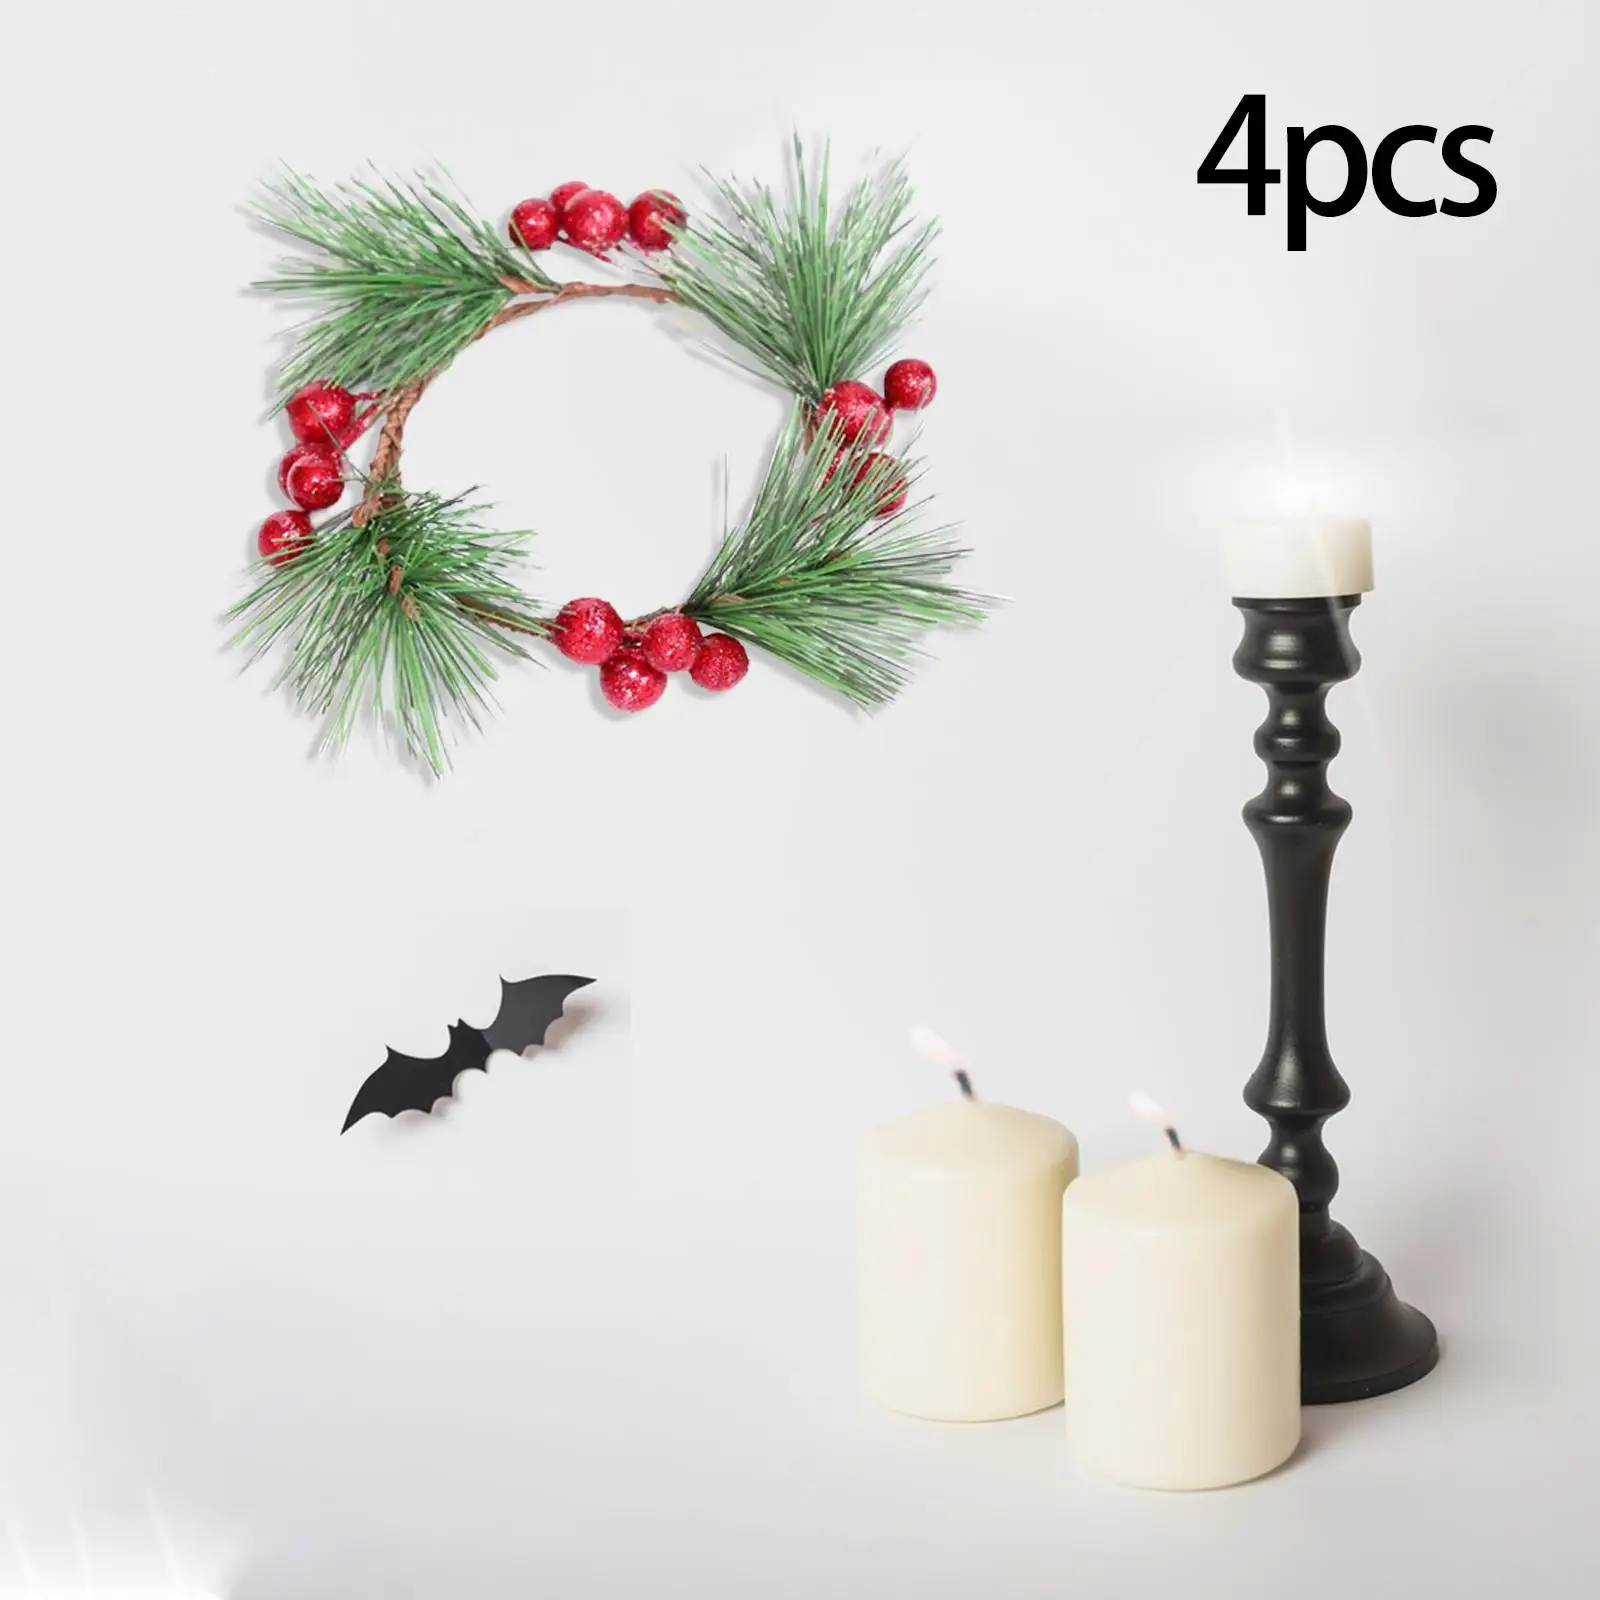 4 Pieces Candle Wreaths Candle Holder Stand Small Wreath Garland Candle Rings for Dinner Table Holiday Party Decor Accents